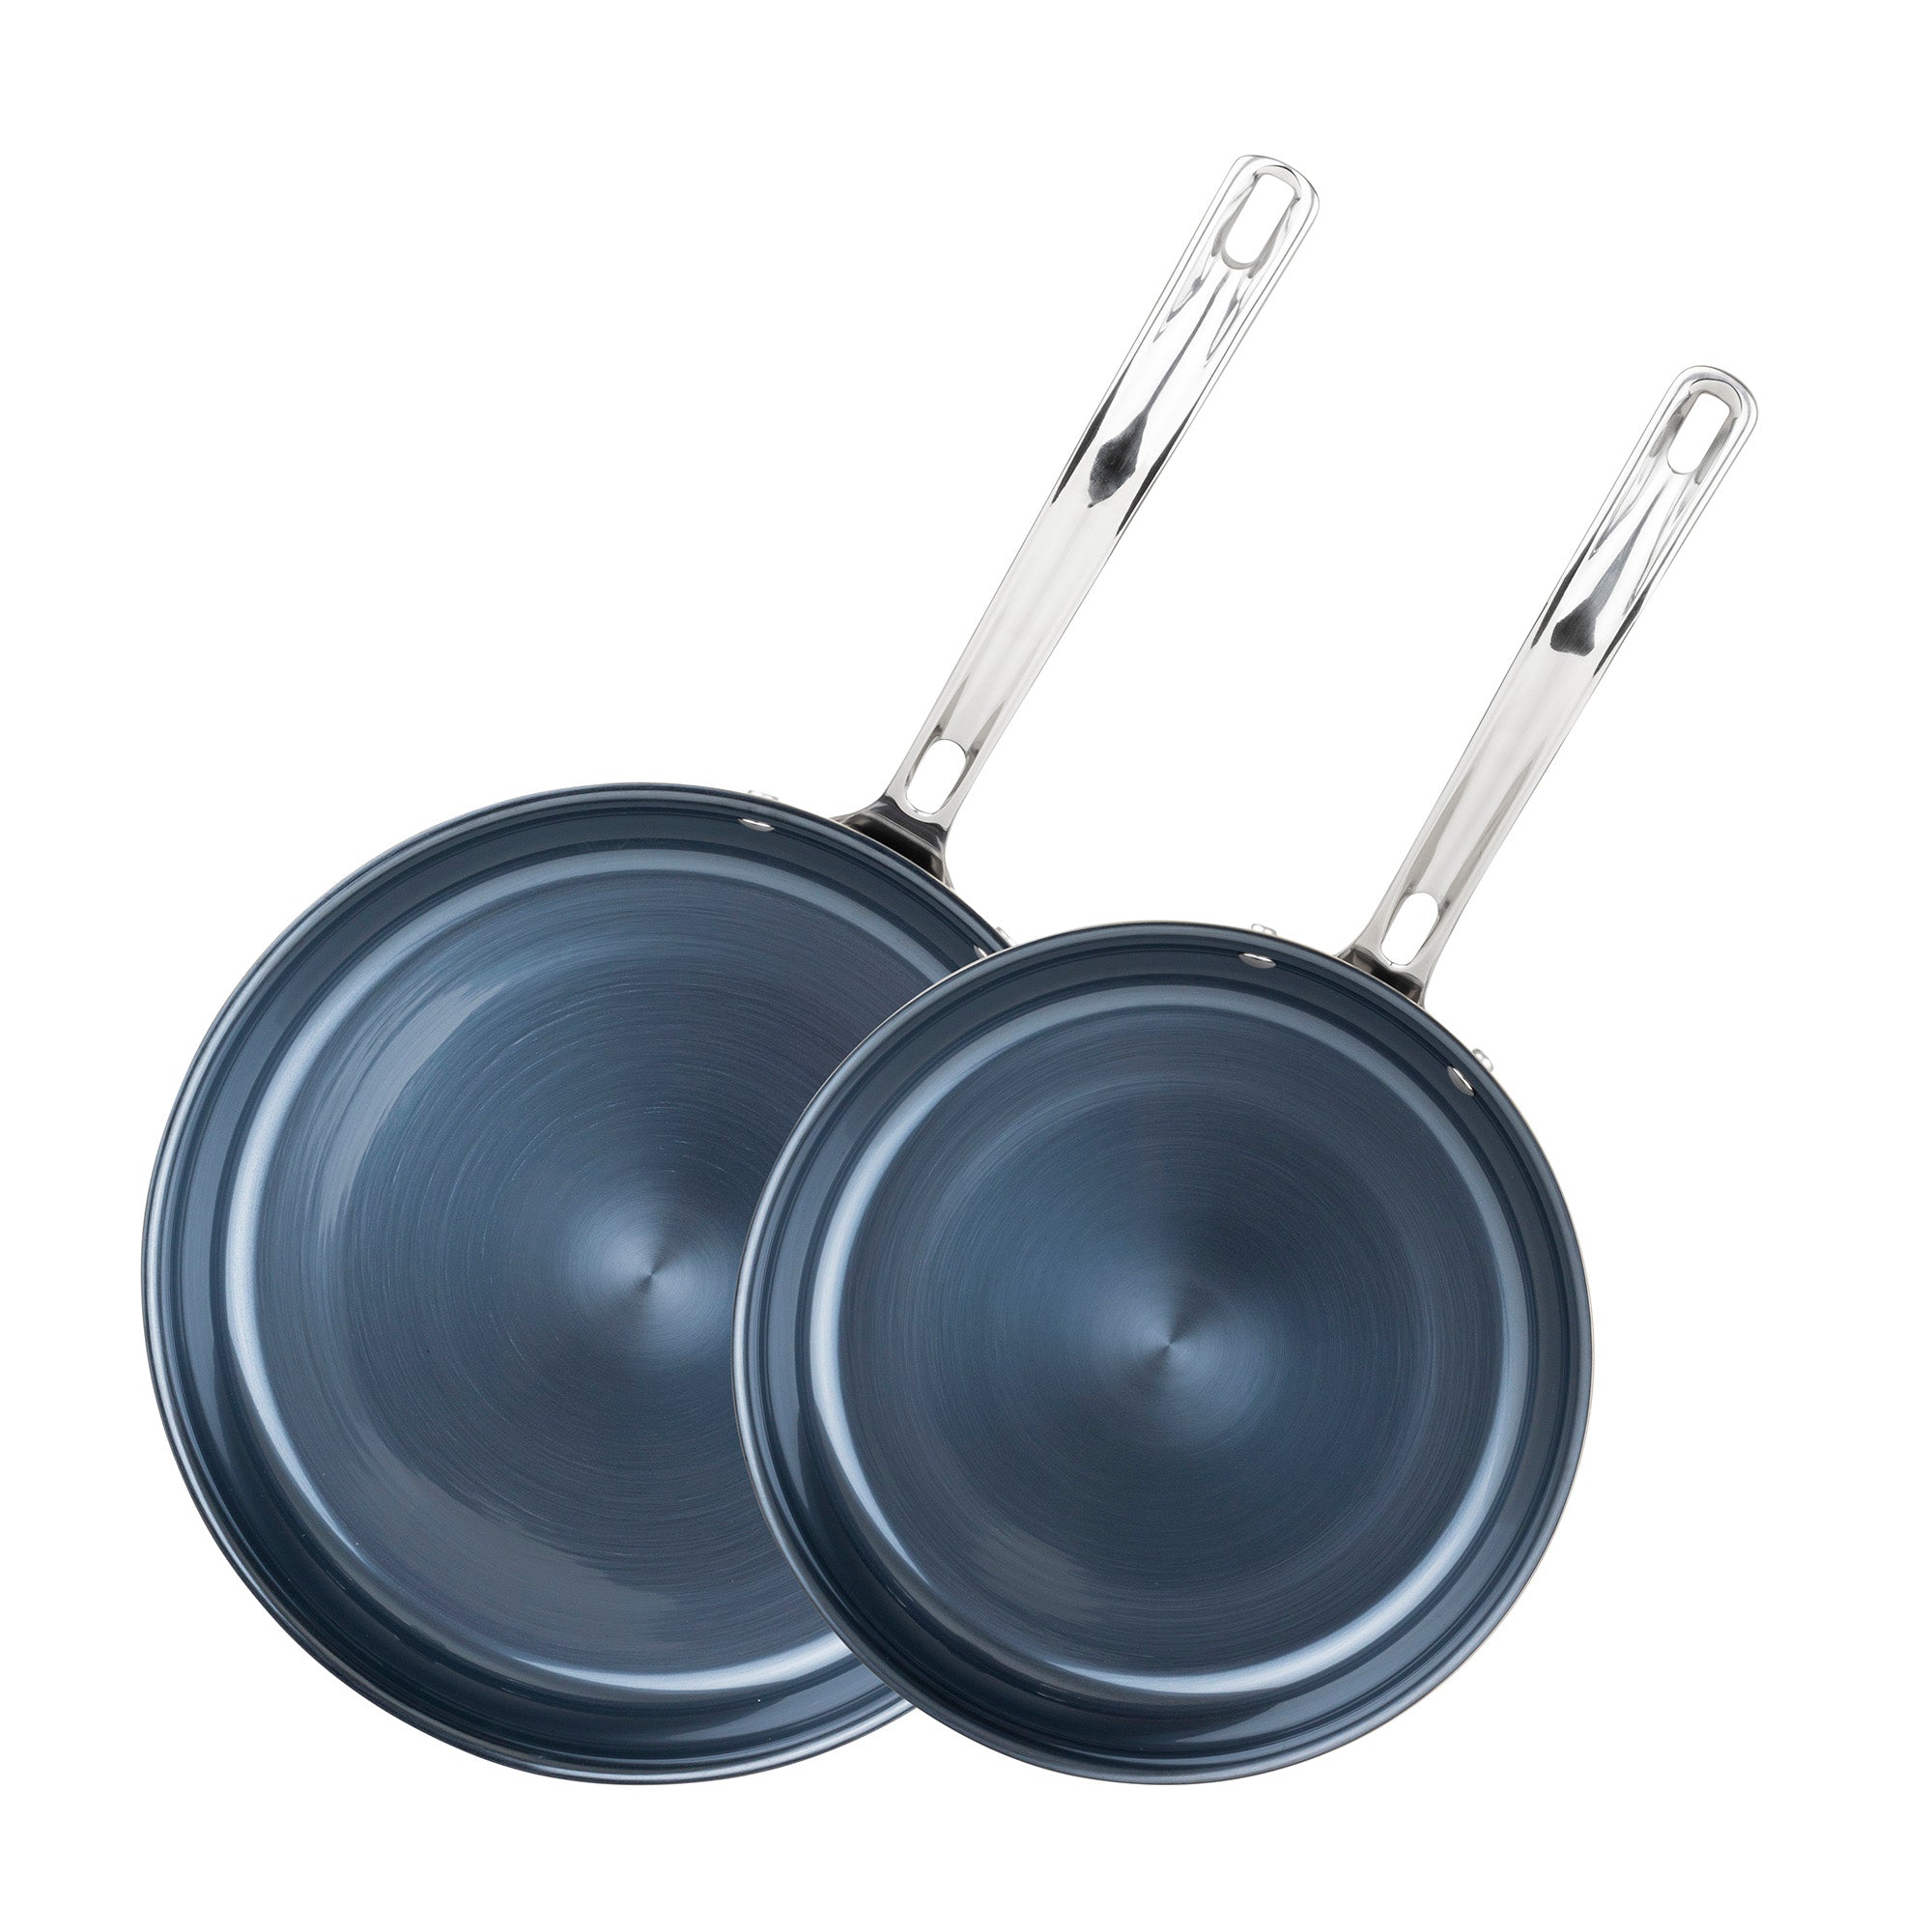 Blue Diamond Cookware 9.5 and 11 Frying Pan Skillet Set